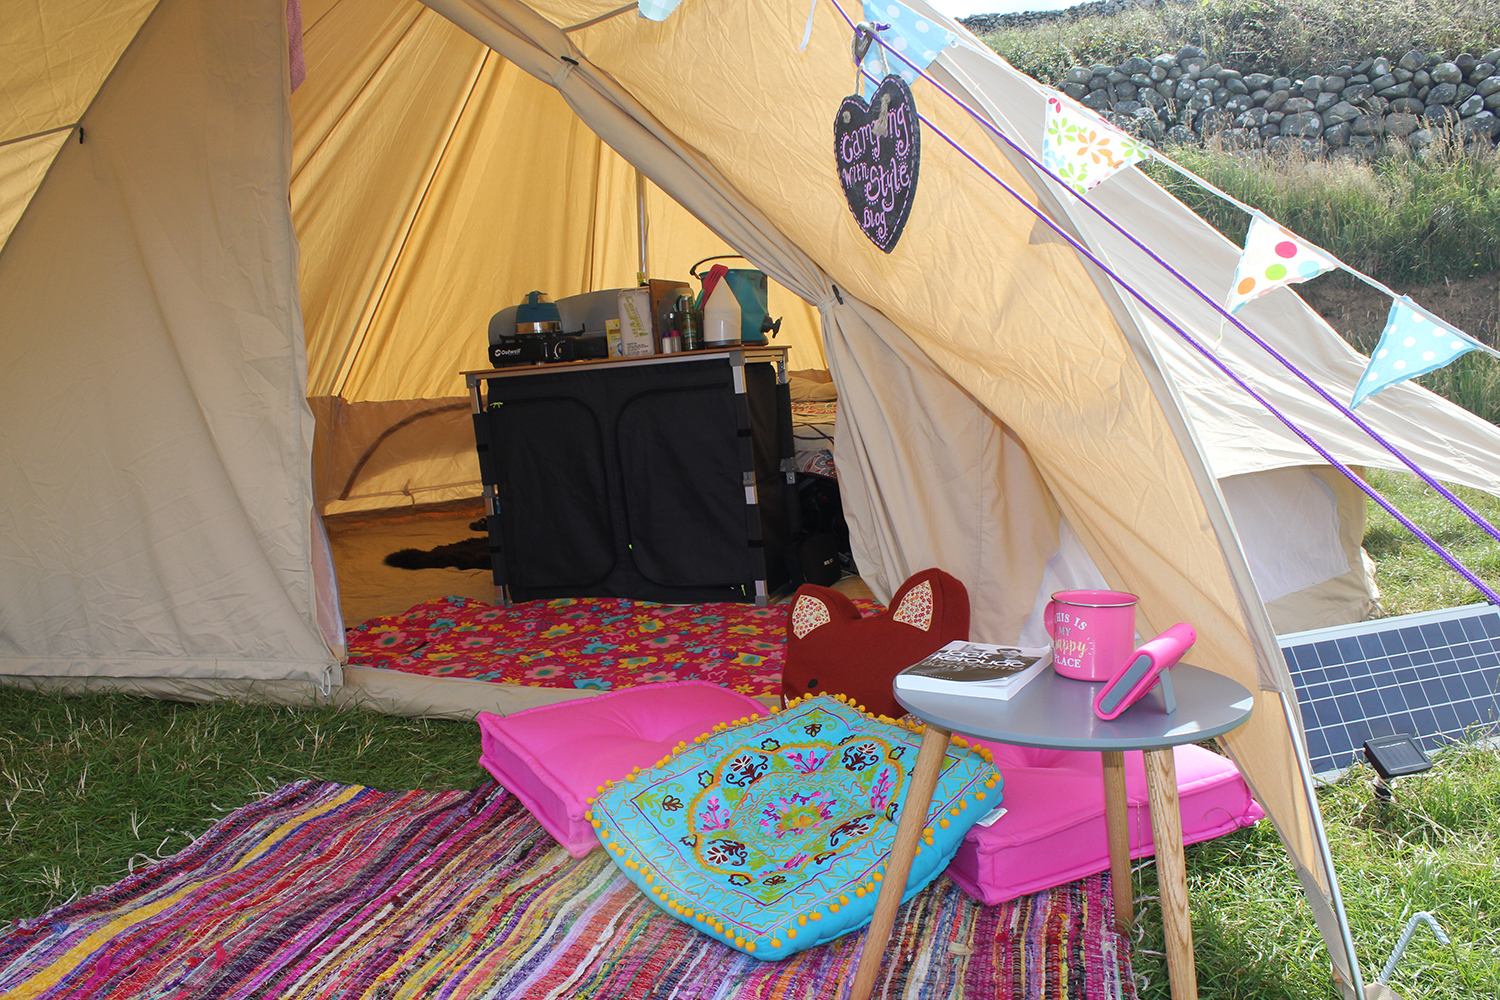 Create your own glamping setup